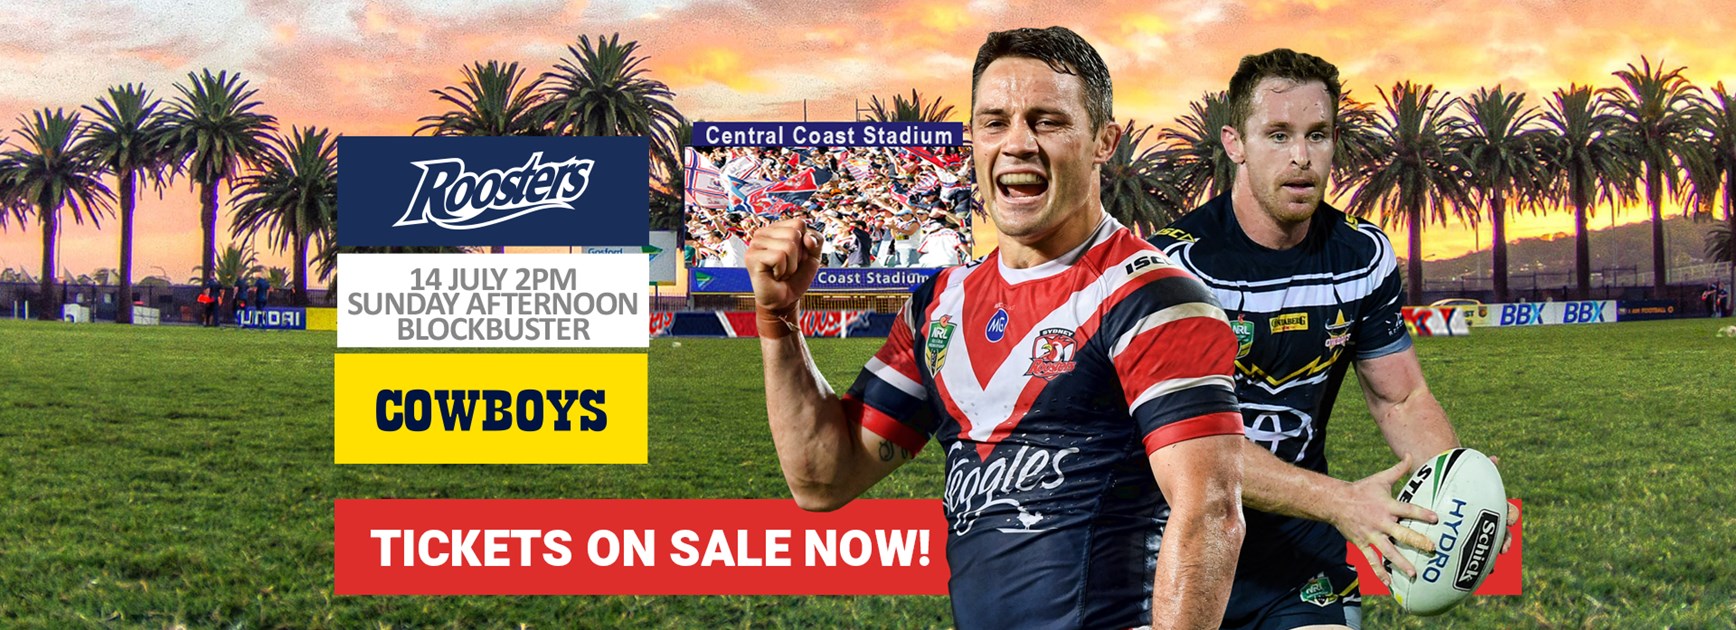 Both 2019 Central Coast Clashes On Sale Now